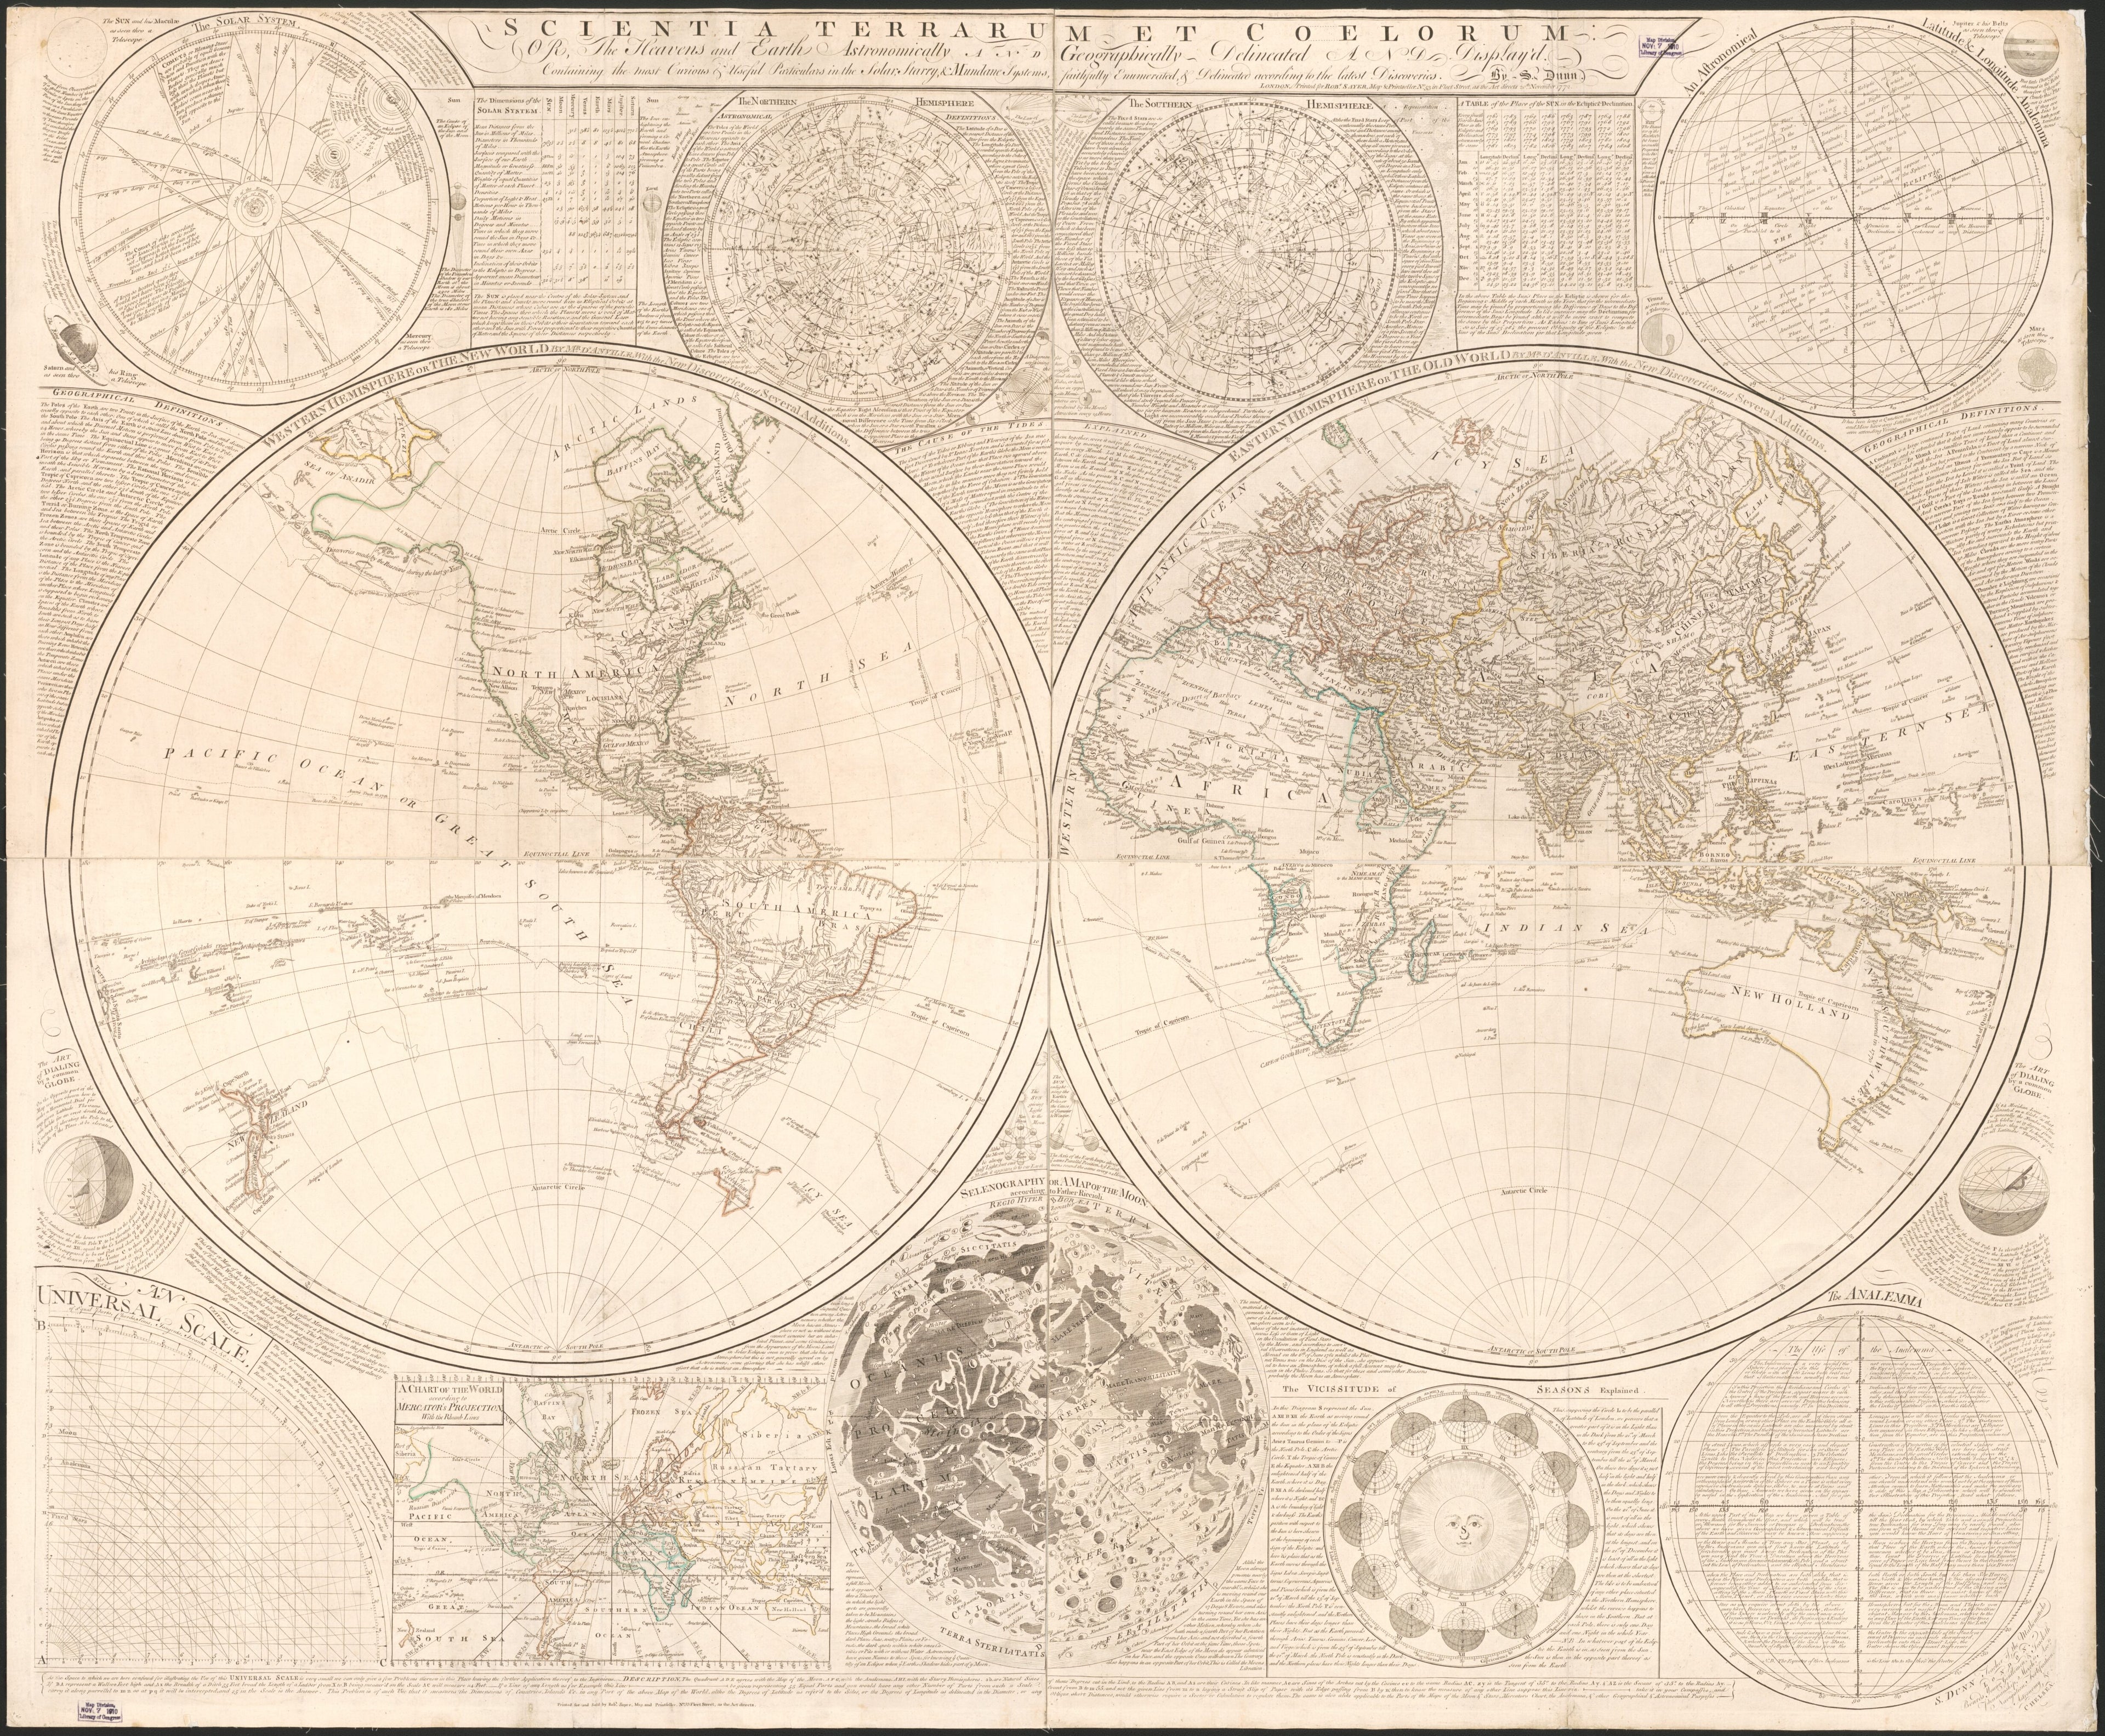 This old map of Scientia Terrarum Et Coelorum : Or, the Heavens and Earth Astronomically and Geographically Delineated and Display&